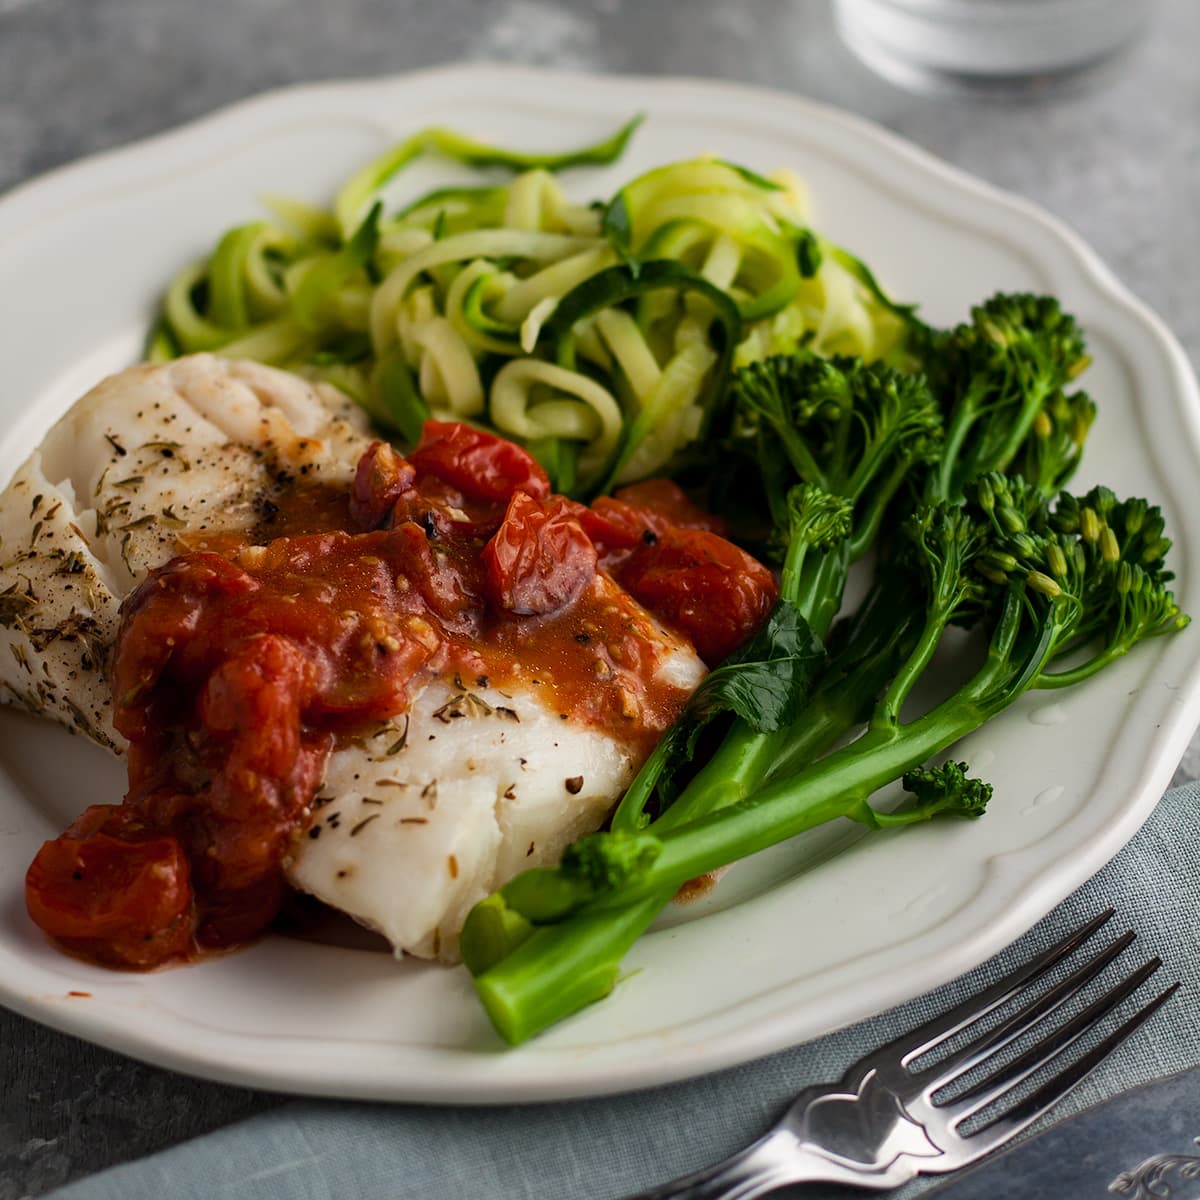 oven baked cod with chunky tomato sauce served on a plate with courgette and broccoli